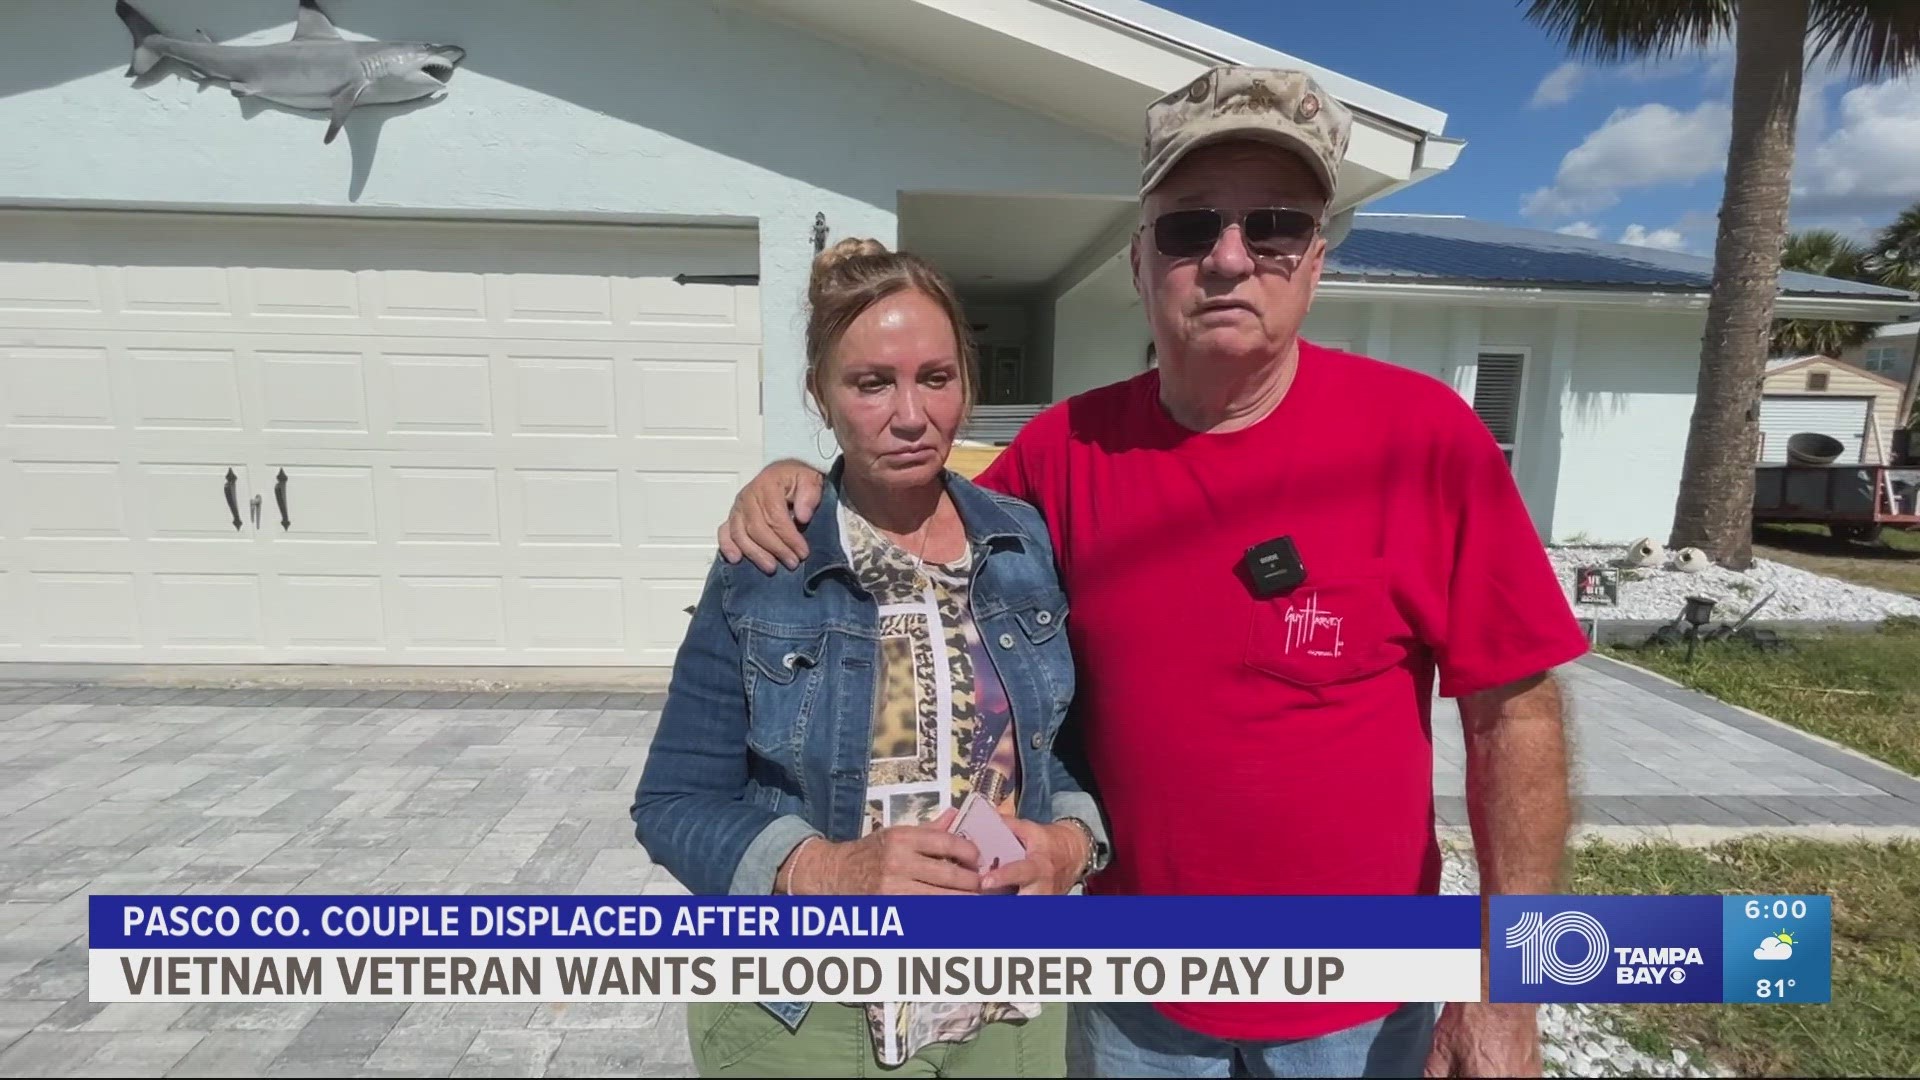 Retired Marine John Gregory said his Hudson home suffered $100k in damage and now his flood insurer claims he wasn't covered.